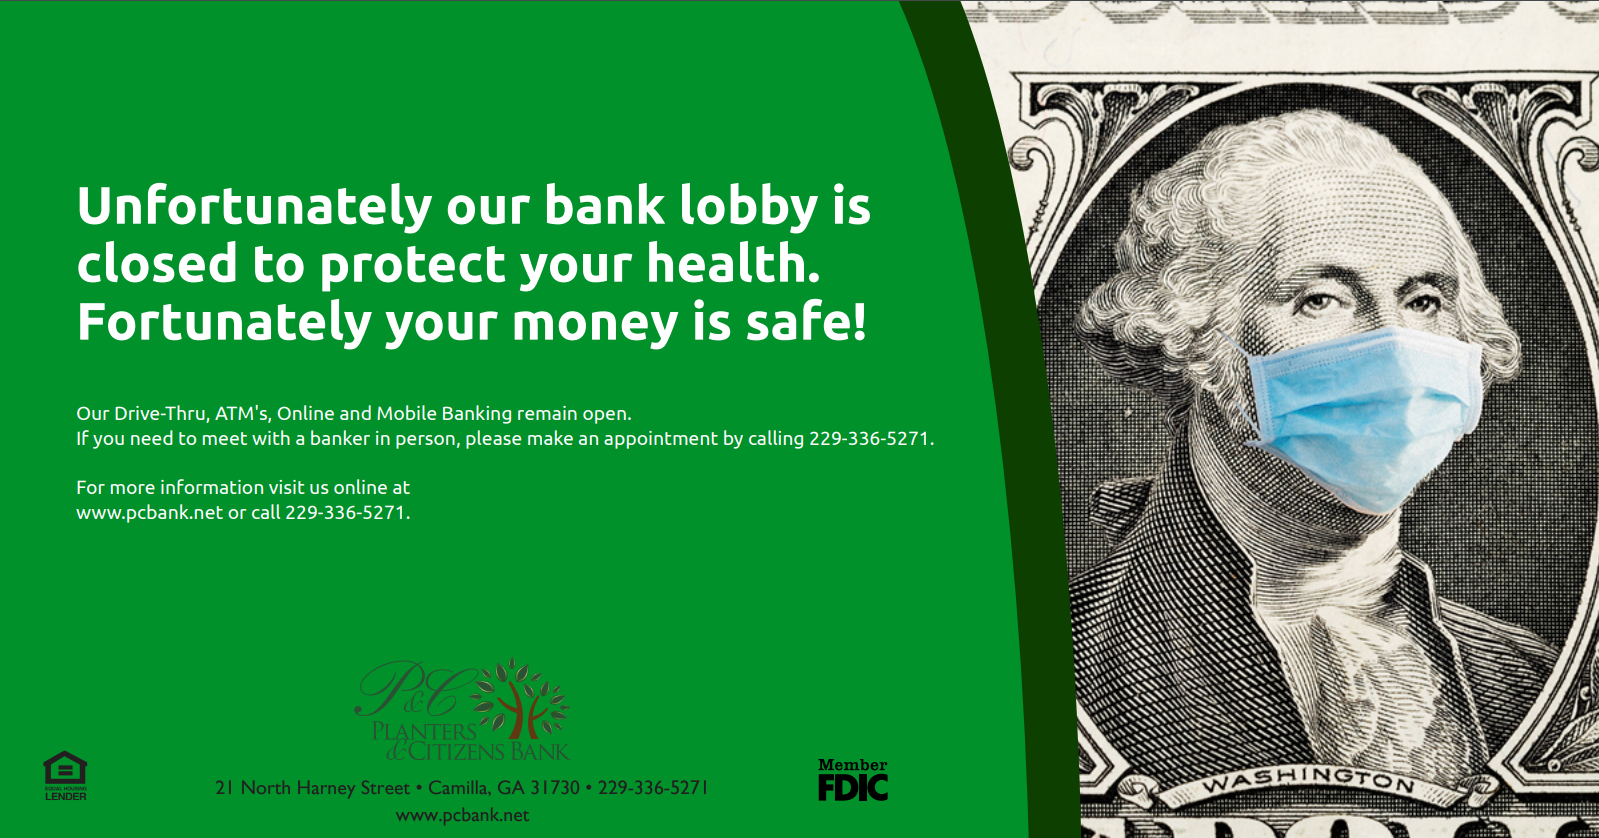 Our bank lobby is closed to protect your health. Our drive-thru, ATM's Online and Mobile Banking remain open. If you need to meet with a banker in person please call us at 229-336-5271